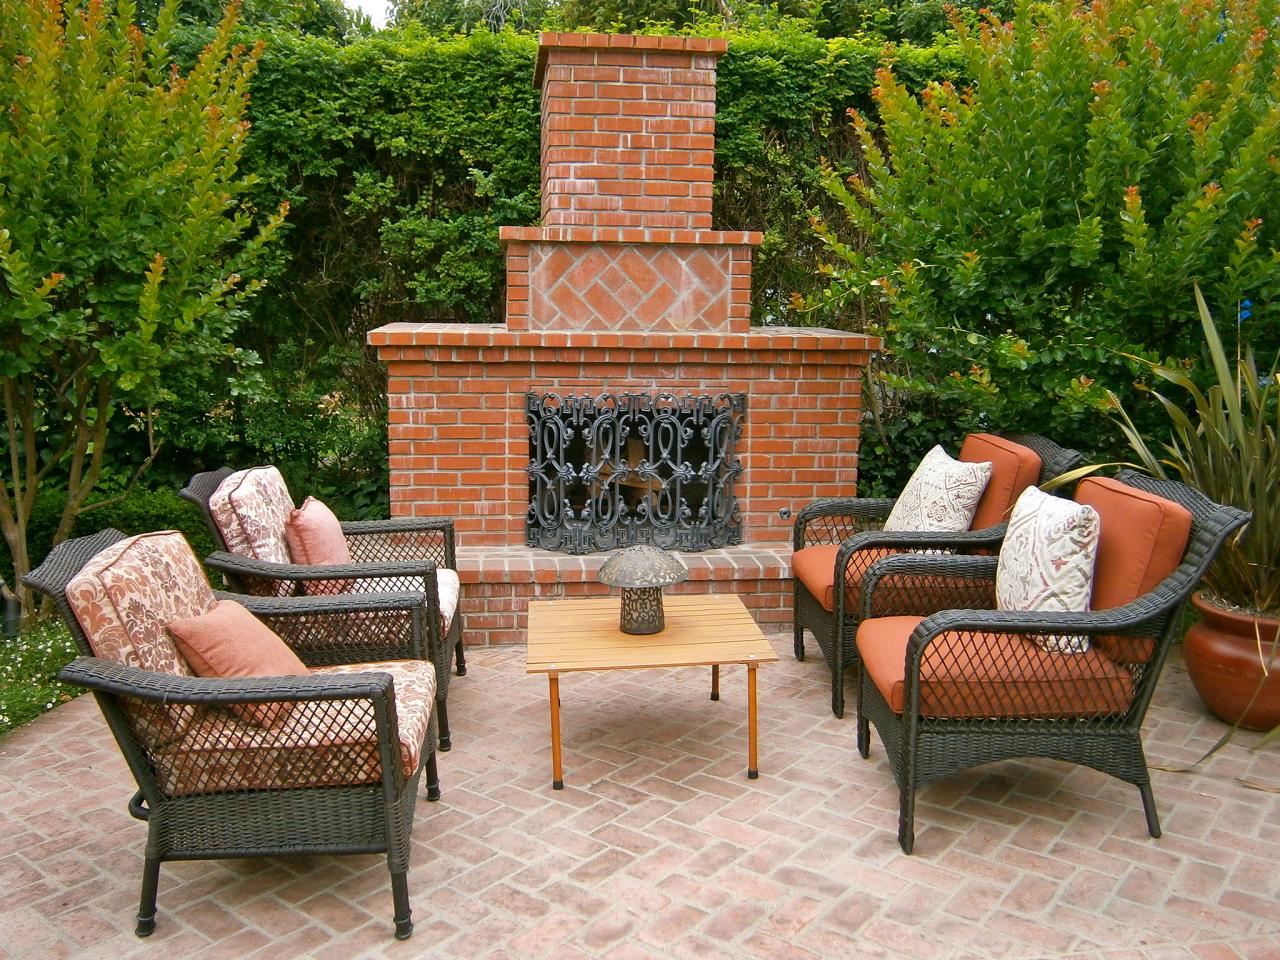 Investigate the options for outdoor brick fireplaces